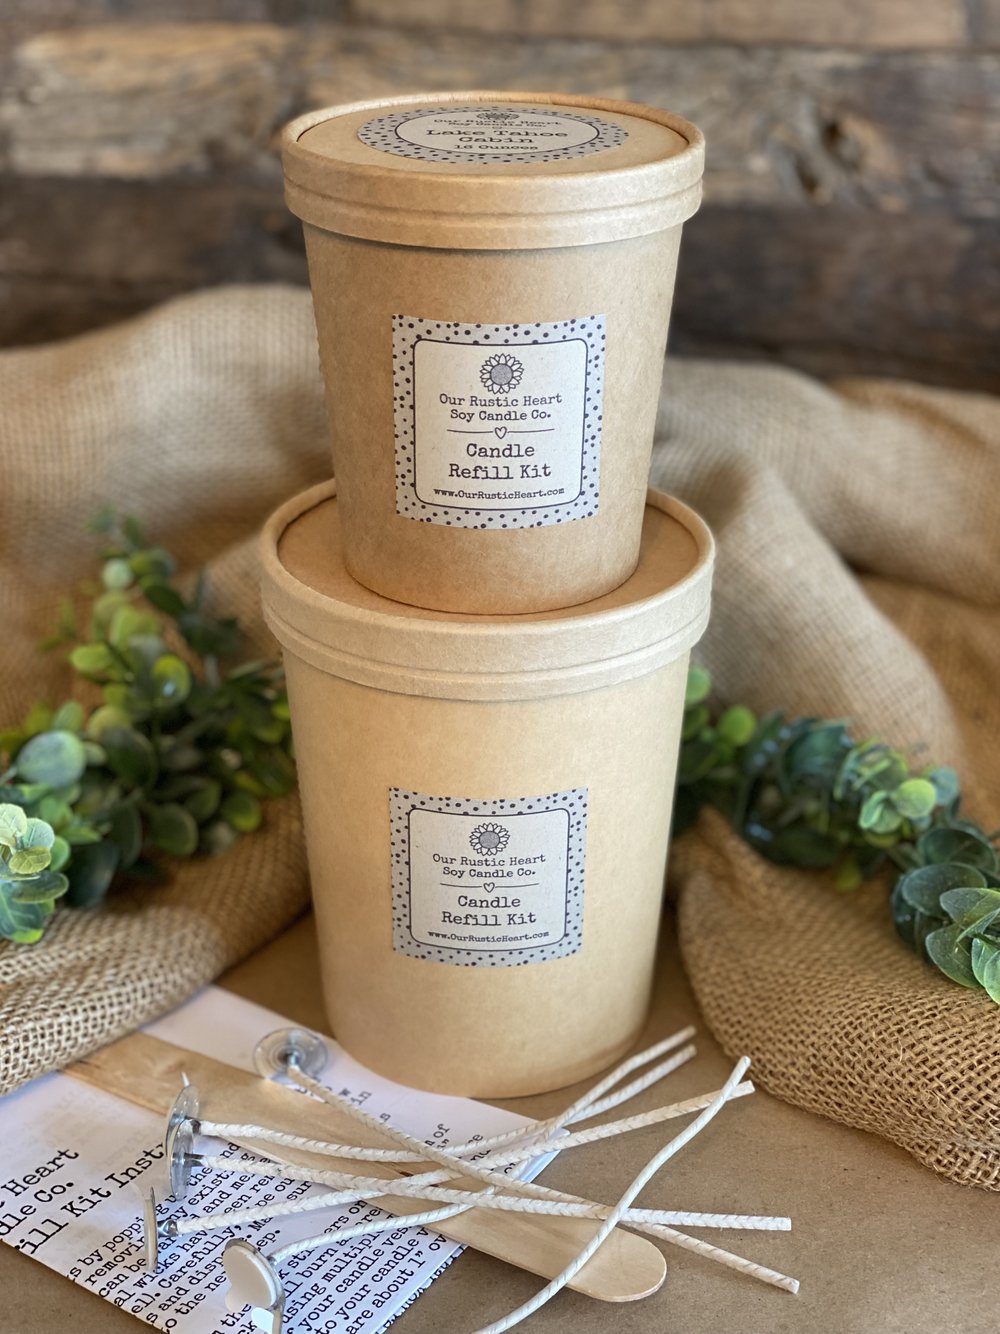 Candle Refill Kit 48 oz. — Our Rustic Heart Candle Co.